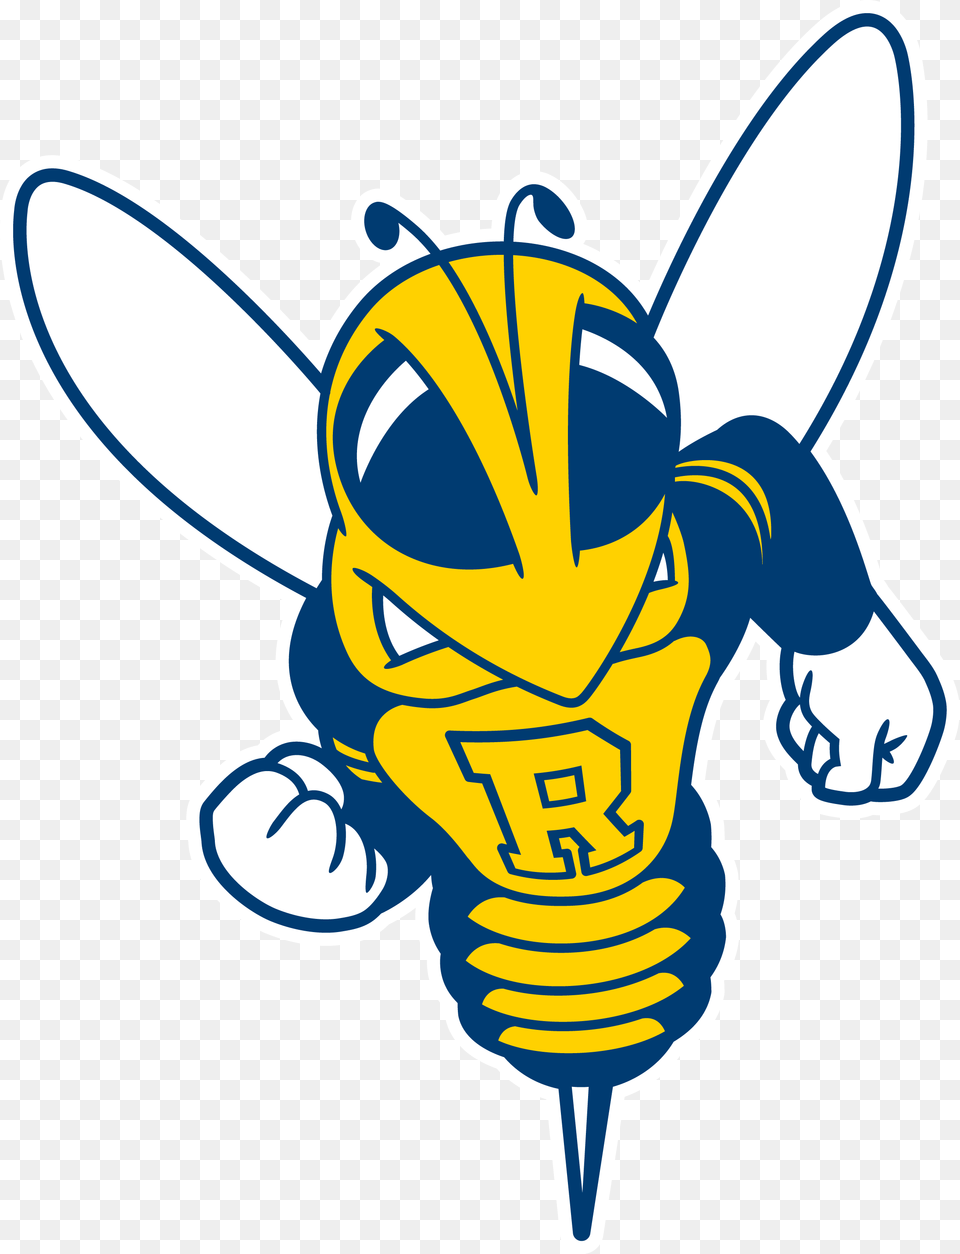 Symbols About Us University Of Rochester, Light, Animal, Bee, Insect Png Image